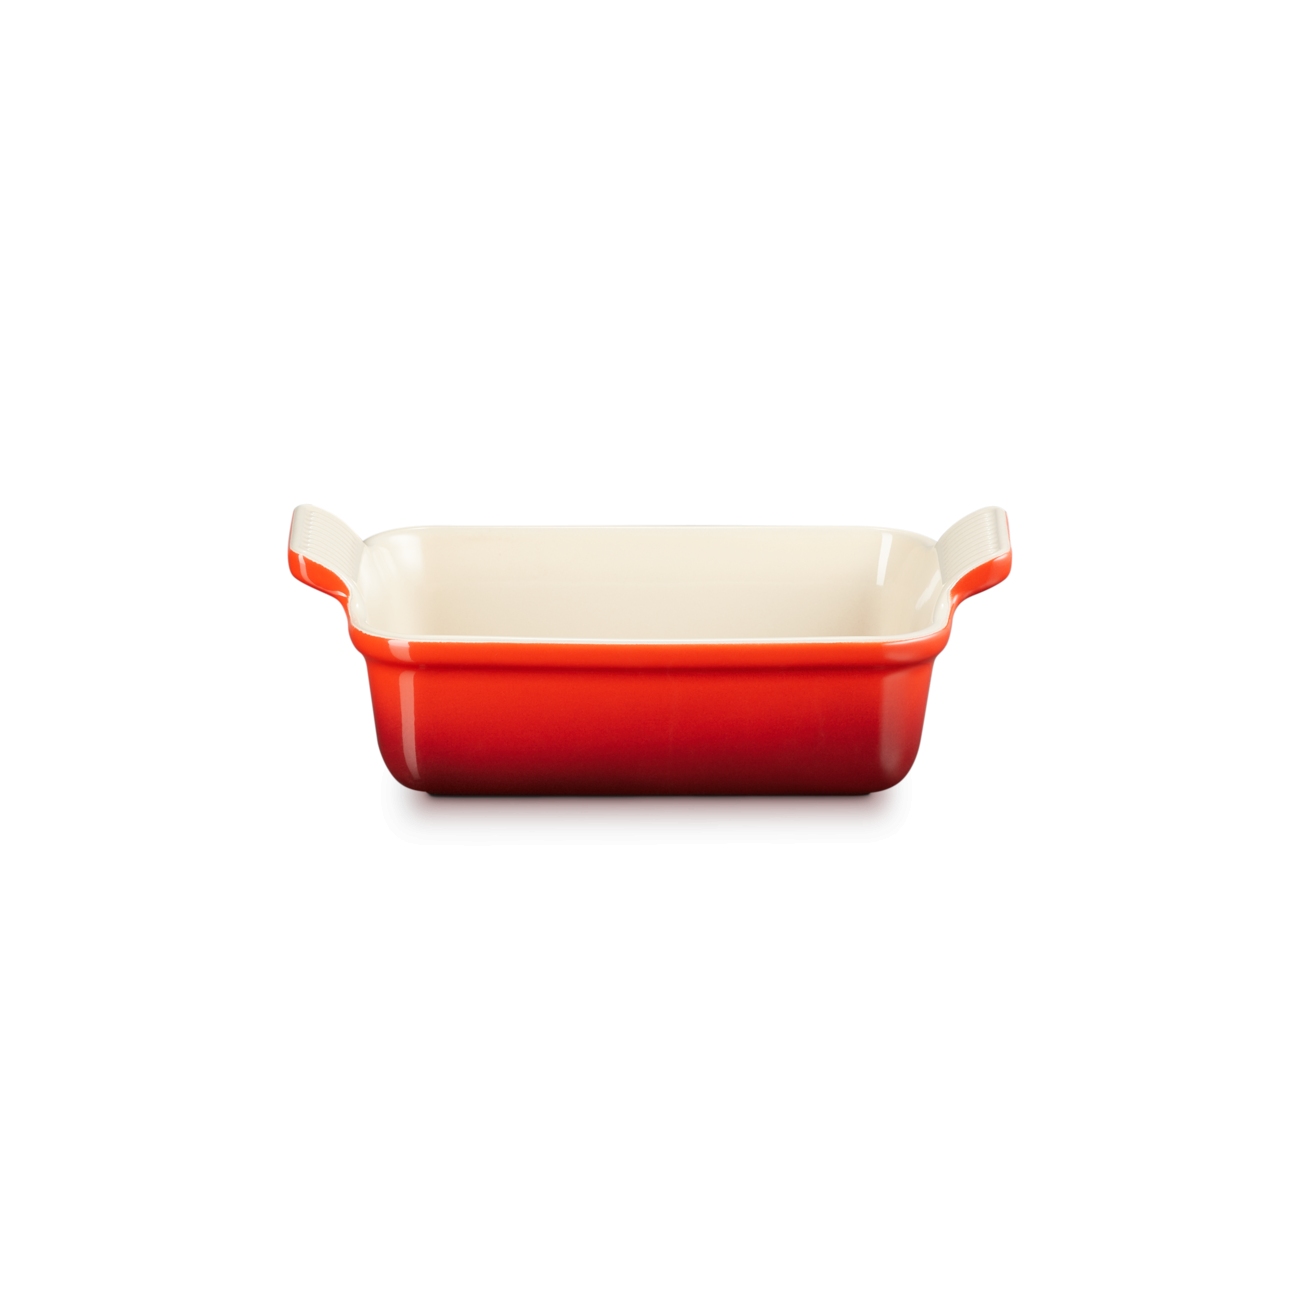 Pyrex 8 inch Square Baking Dish with Red Lid